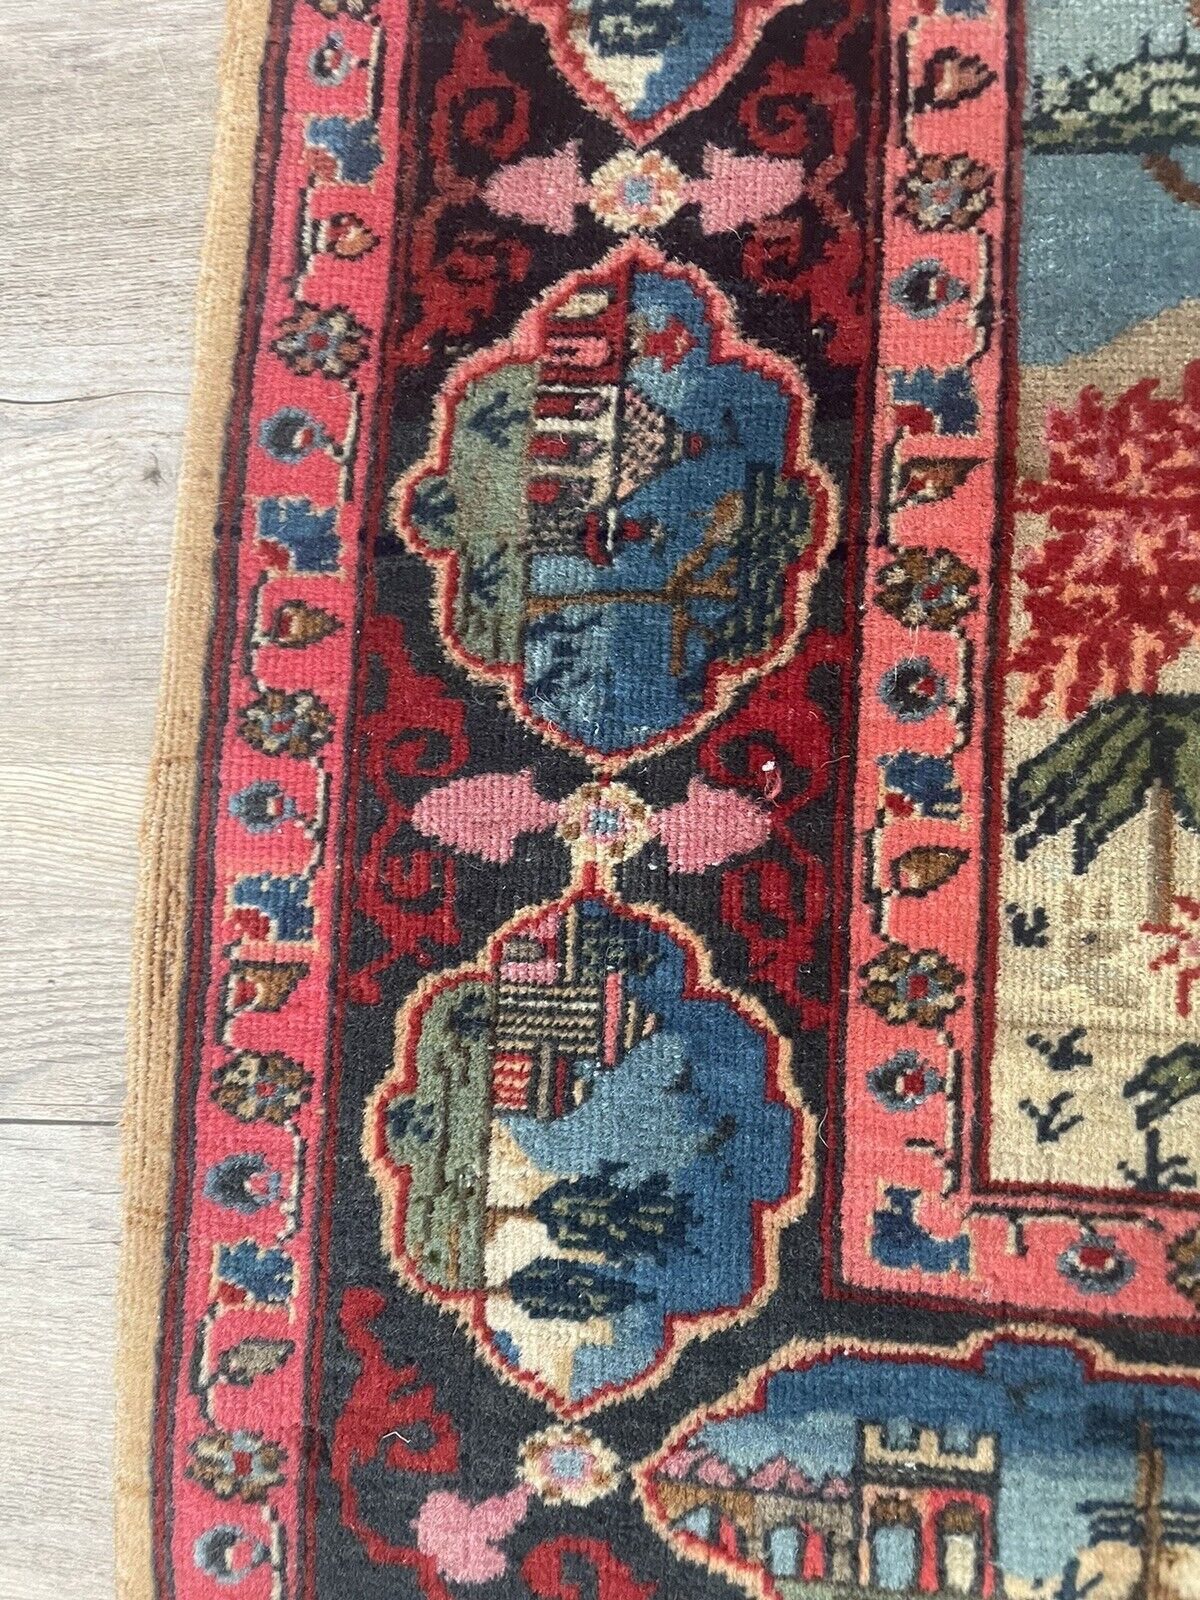 Close-up of Persian artistry on Handmade Antique Persian Kashan Collectible Rug - Detailed view showcasing the essence of Persian artistry captured in the rug's design and weaving.